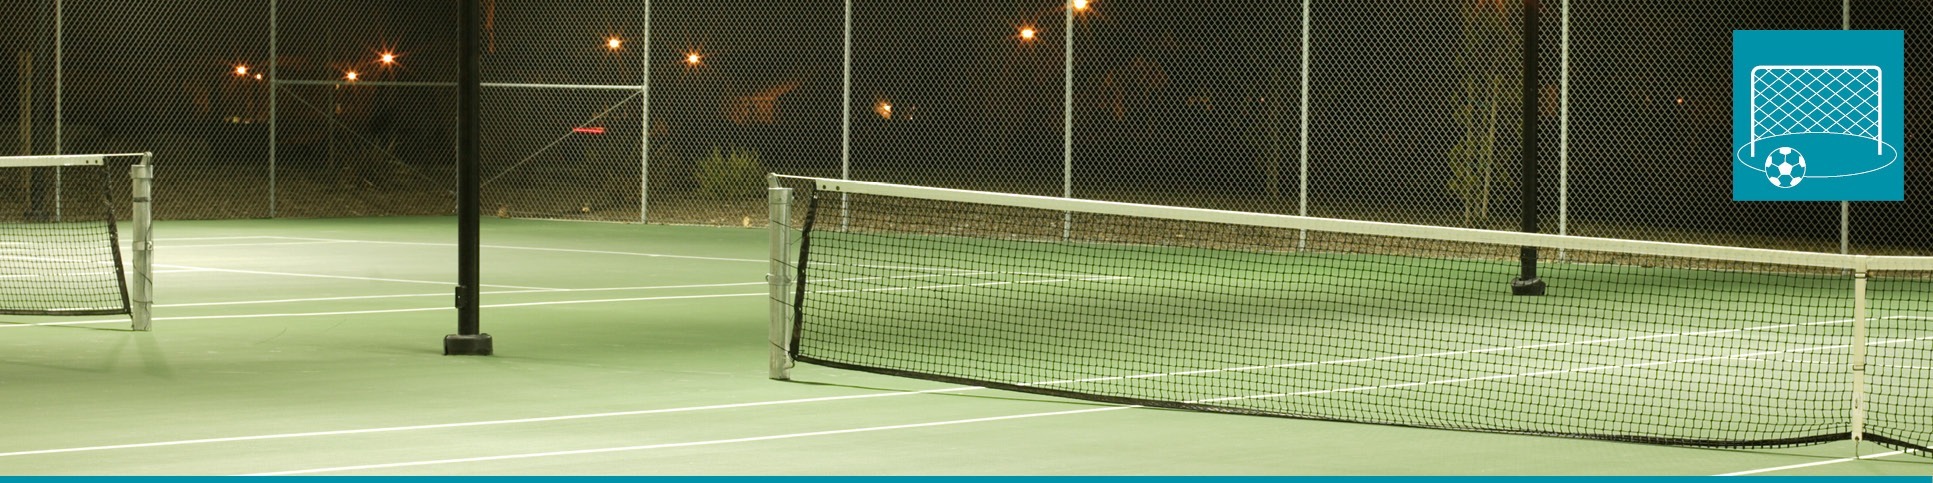 Tamlite Lighting for Outdoors sports header tennis court image with icon